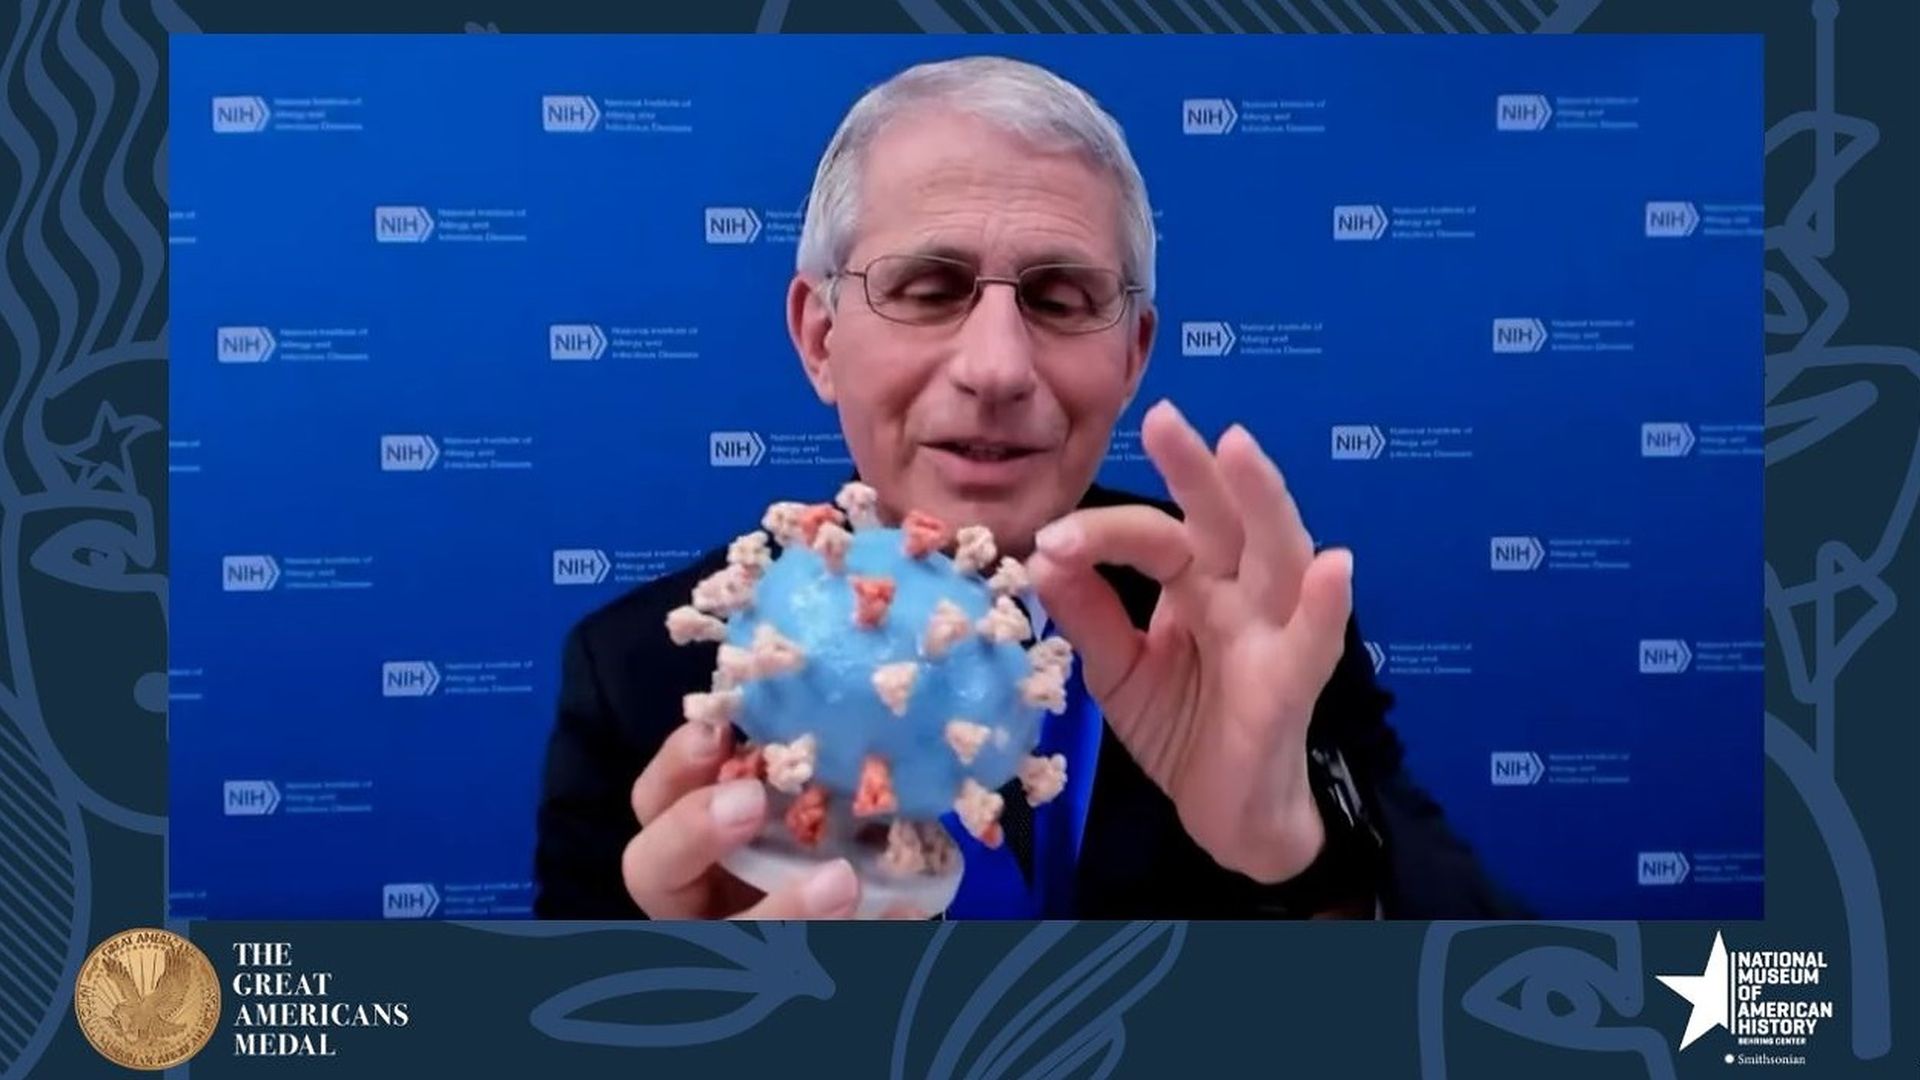 Anthony Fauci, the White House Chief Medical Adviser on COVID-19, with his 3D model.